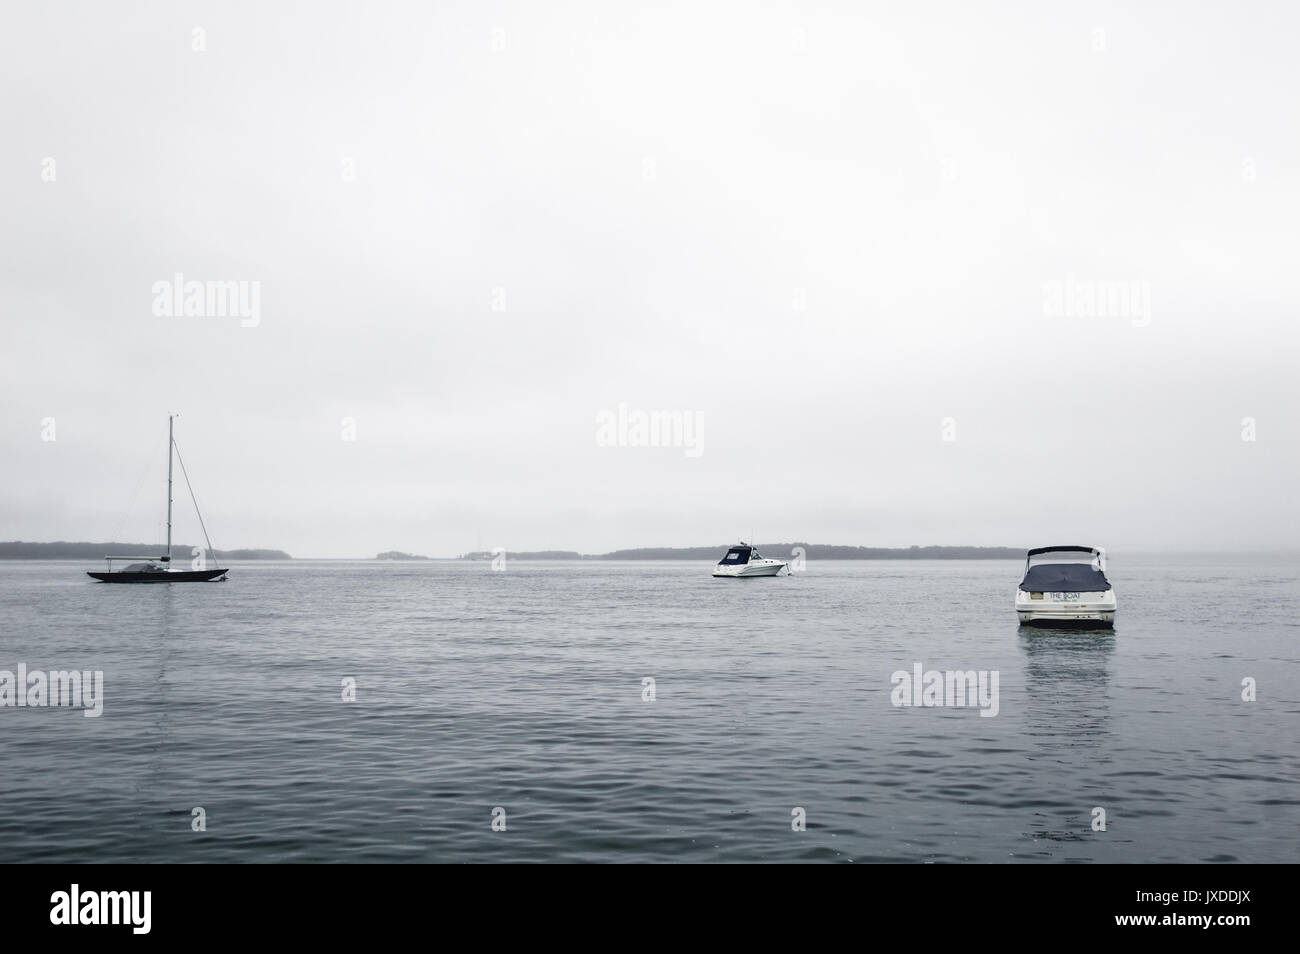 3 boats on the water between Sag Harbor and Shelter Island on a foggy, gray day in the Hamptons, NY. Stock Photo